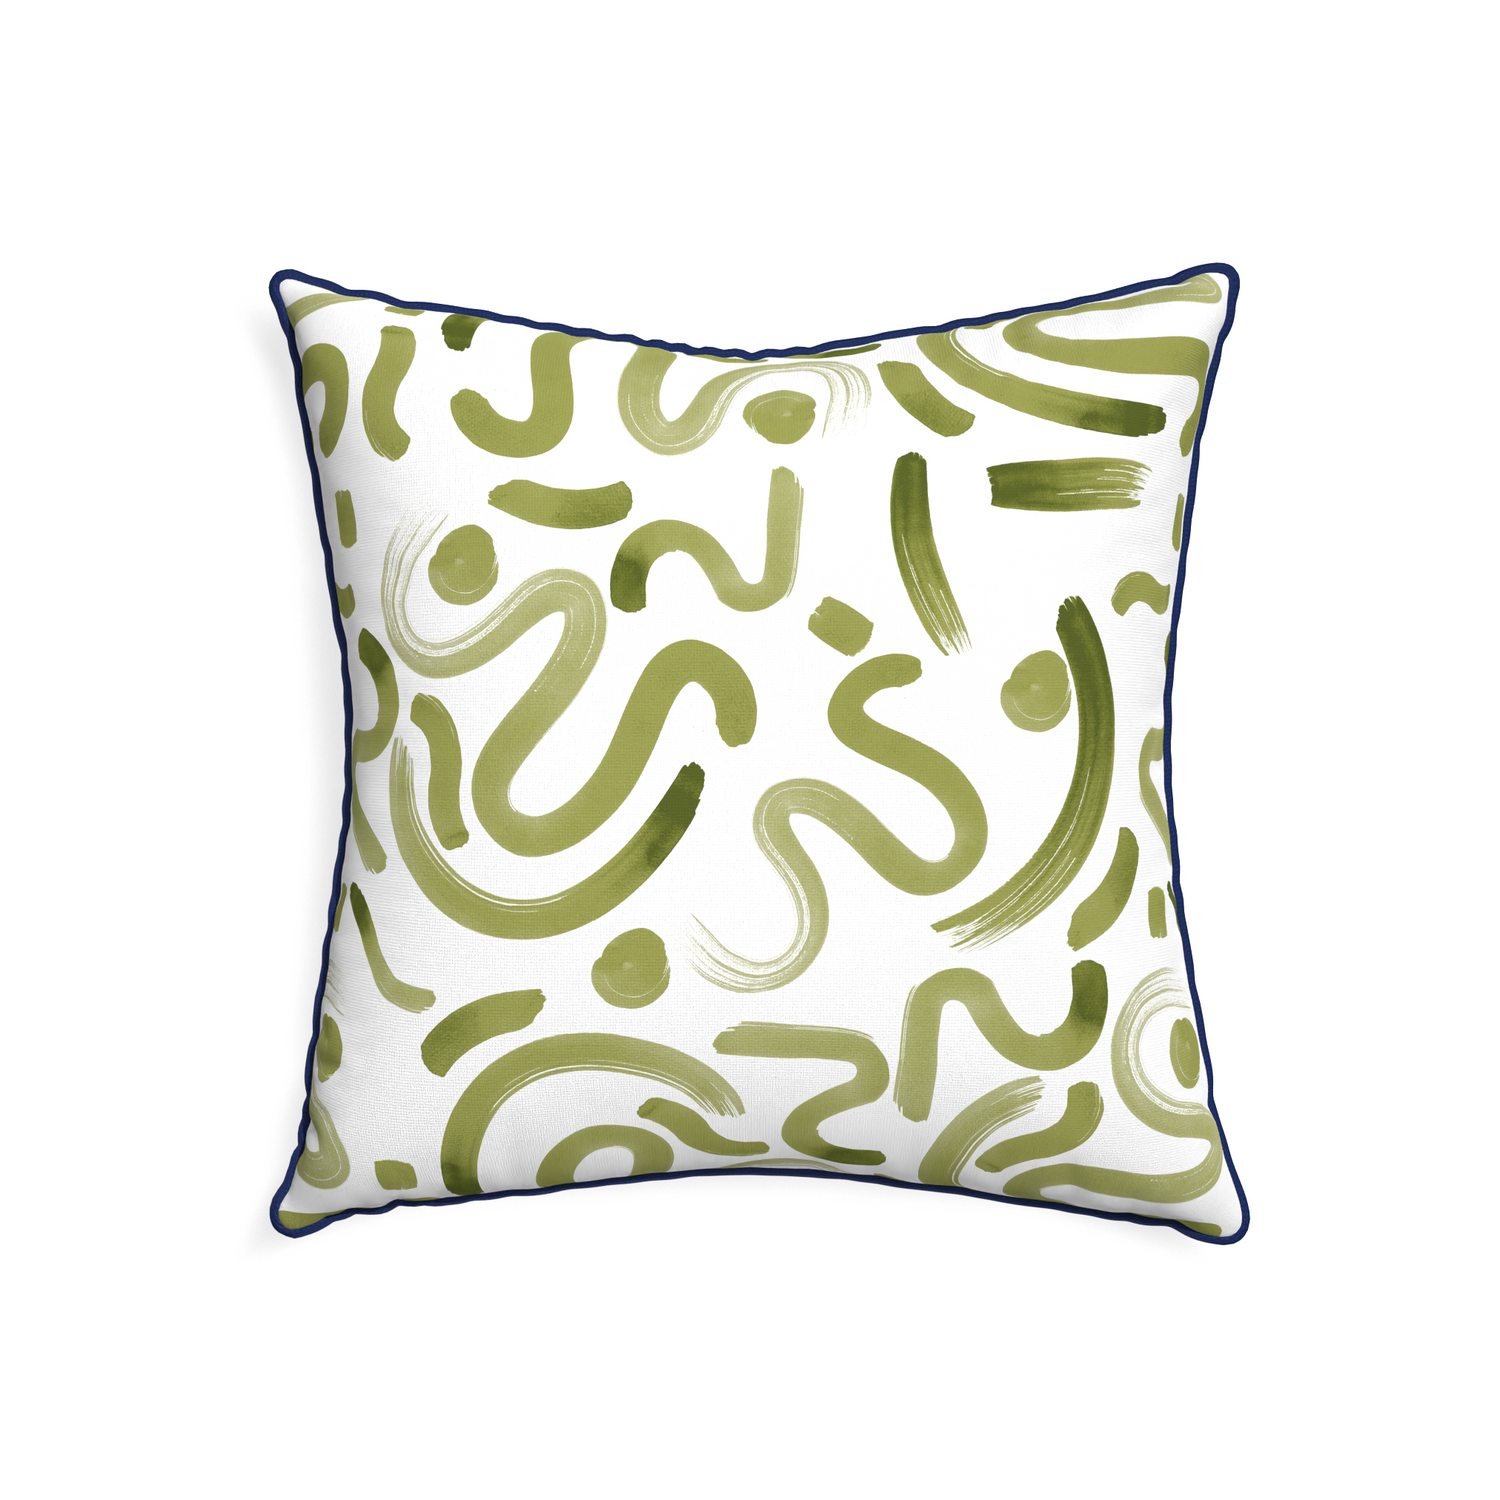 22-square hockney moss custom moss greenpillow with midnight piping on white background